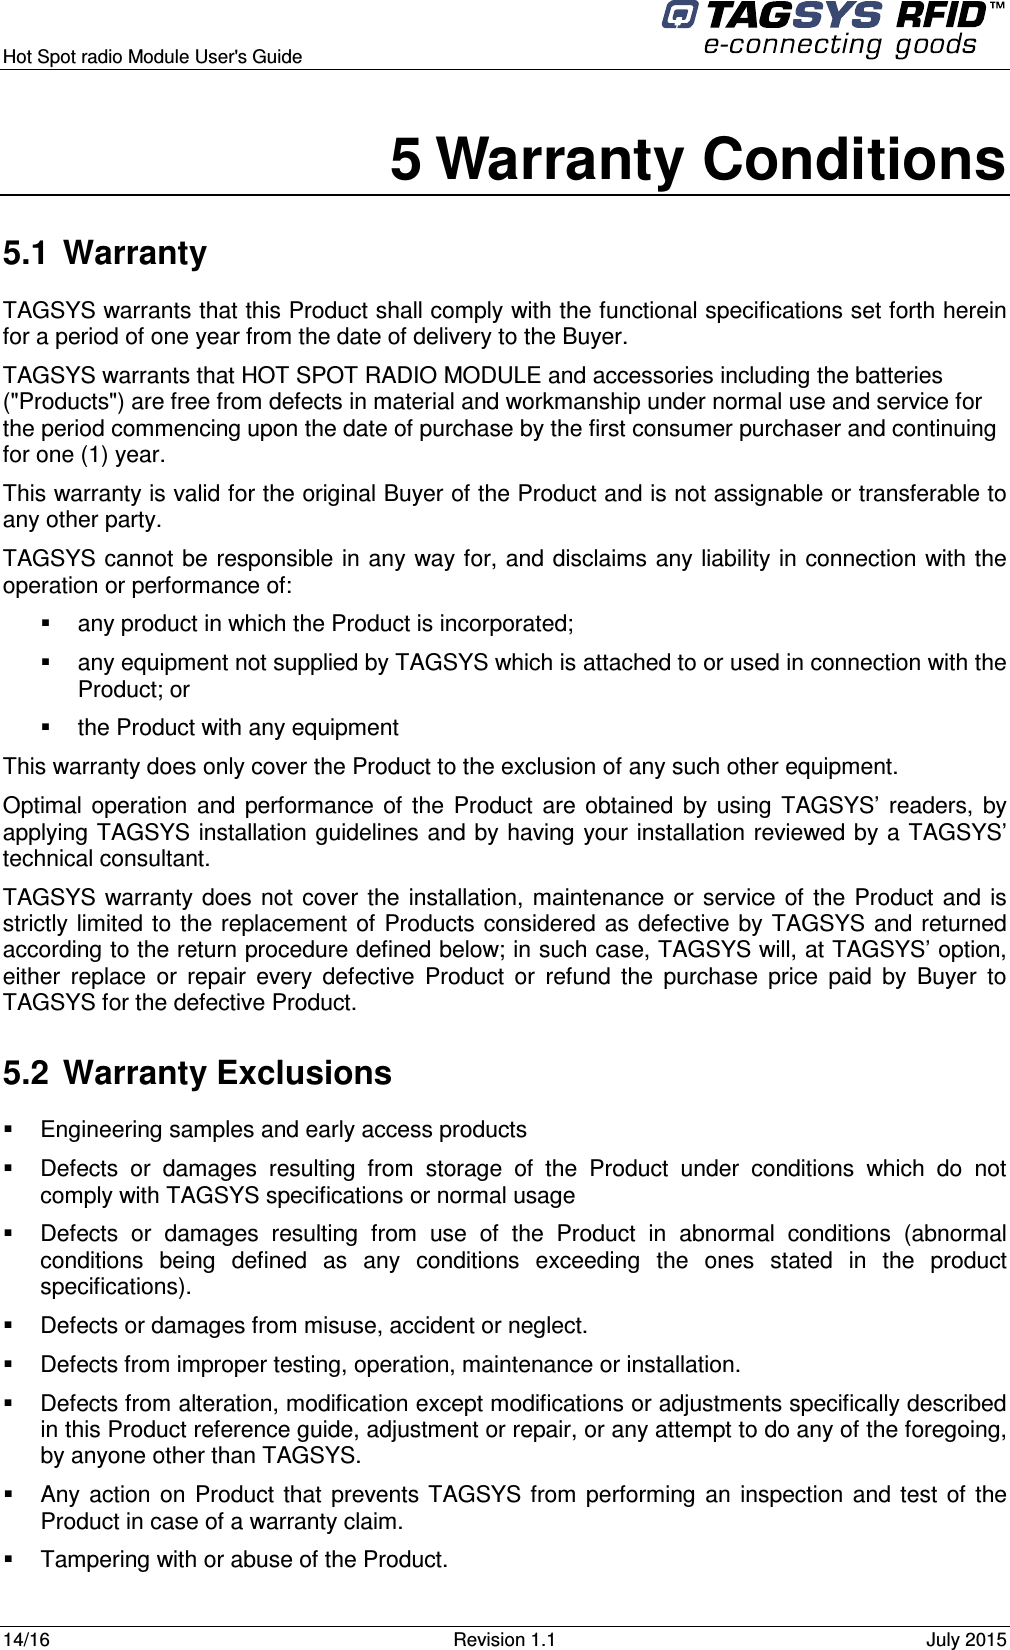  Hot Spot radio Module User&apos;s Guide     14/16  Revision 1.1  July 2015  5 Warranty Conditions 5.1  Warranty TAGSYS warrants that this Product shall comply with the functional specifications set forth herein for a period of one year from the date of delivery to the Buyer. TAGSYS warrants that HOT SPOT RADIO MODULE and accessories including the batteries (&quot;Products&quot;) are free from defects in material and workmanship under normal use and service for the period commencing upon the date of purchase by the first consumer purchaser and continuing for one (1) year.  This warranty is valid for the original Buyer of the Product and is not assignable or transferable to any other party. TAGSYS cannot be responsible in any way for, and disclaims any liability in connection with the operation or performance of:   any product in which the Product is incorporated;   any equipment not supplied by TAGSYS which is attached to or used in connection with the Product; or   the Product with any equipment This warranty does only cover the Product to the exclusion of any such other equipment. Optimal  operation  and  performance  of  the  Product  are  obtained  by  using  TAGSYS’  readers,  by applying TAGSYS installation guidelines and by having your installation reviewed by a TAGSYS’ technical consultant. TAGSYS warranty  does not  cover the  installation,  maintenance  or service  of  the  Product  and is strictly limited to the replacement of  Products considered as defective by  TAGSYS and  returned according to the return procedure defined below; in such case, TAGSYS will, at TAGSYS’ option, either  replace  or  repair  every  defective  Product  or  refund  the  purchase  price  paid  by  Buyer  to TAGSYS for the defective Product. 5.2  Warranty Exclusions   Engineering samples and early access products   Defects  or  damages  resulting  from  storage  of  the  Product  under  conditions  which  do  not comply with TAGSYS specifications or normal usage   Defects  or  damages  resulting  from  use  of  the  Product  in  abnormal  conditions  (abnormal conditions  being  defined  as  any  conditions  exceeding  the  ones  stated  in  the  product specifications).   Defects or damages from misuse, accident or neglect.   Defects from improper testing, operation, maintenance or installation.   Defects from alteration, modification except modifications or adjustments specifically described in this Product reference guide, adjustment or repair, or any attempt to do any of the foregoing, by anyone other than TAGSYS.   Any action  on  Product  that  prevents  TAGSYS from  performing  an  inspection  and test  of  the Product in case of a warranty claim.   Tampering with or abuse of the Product. 